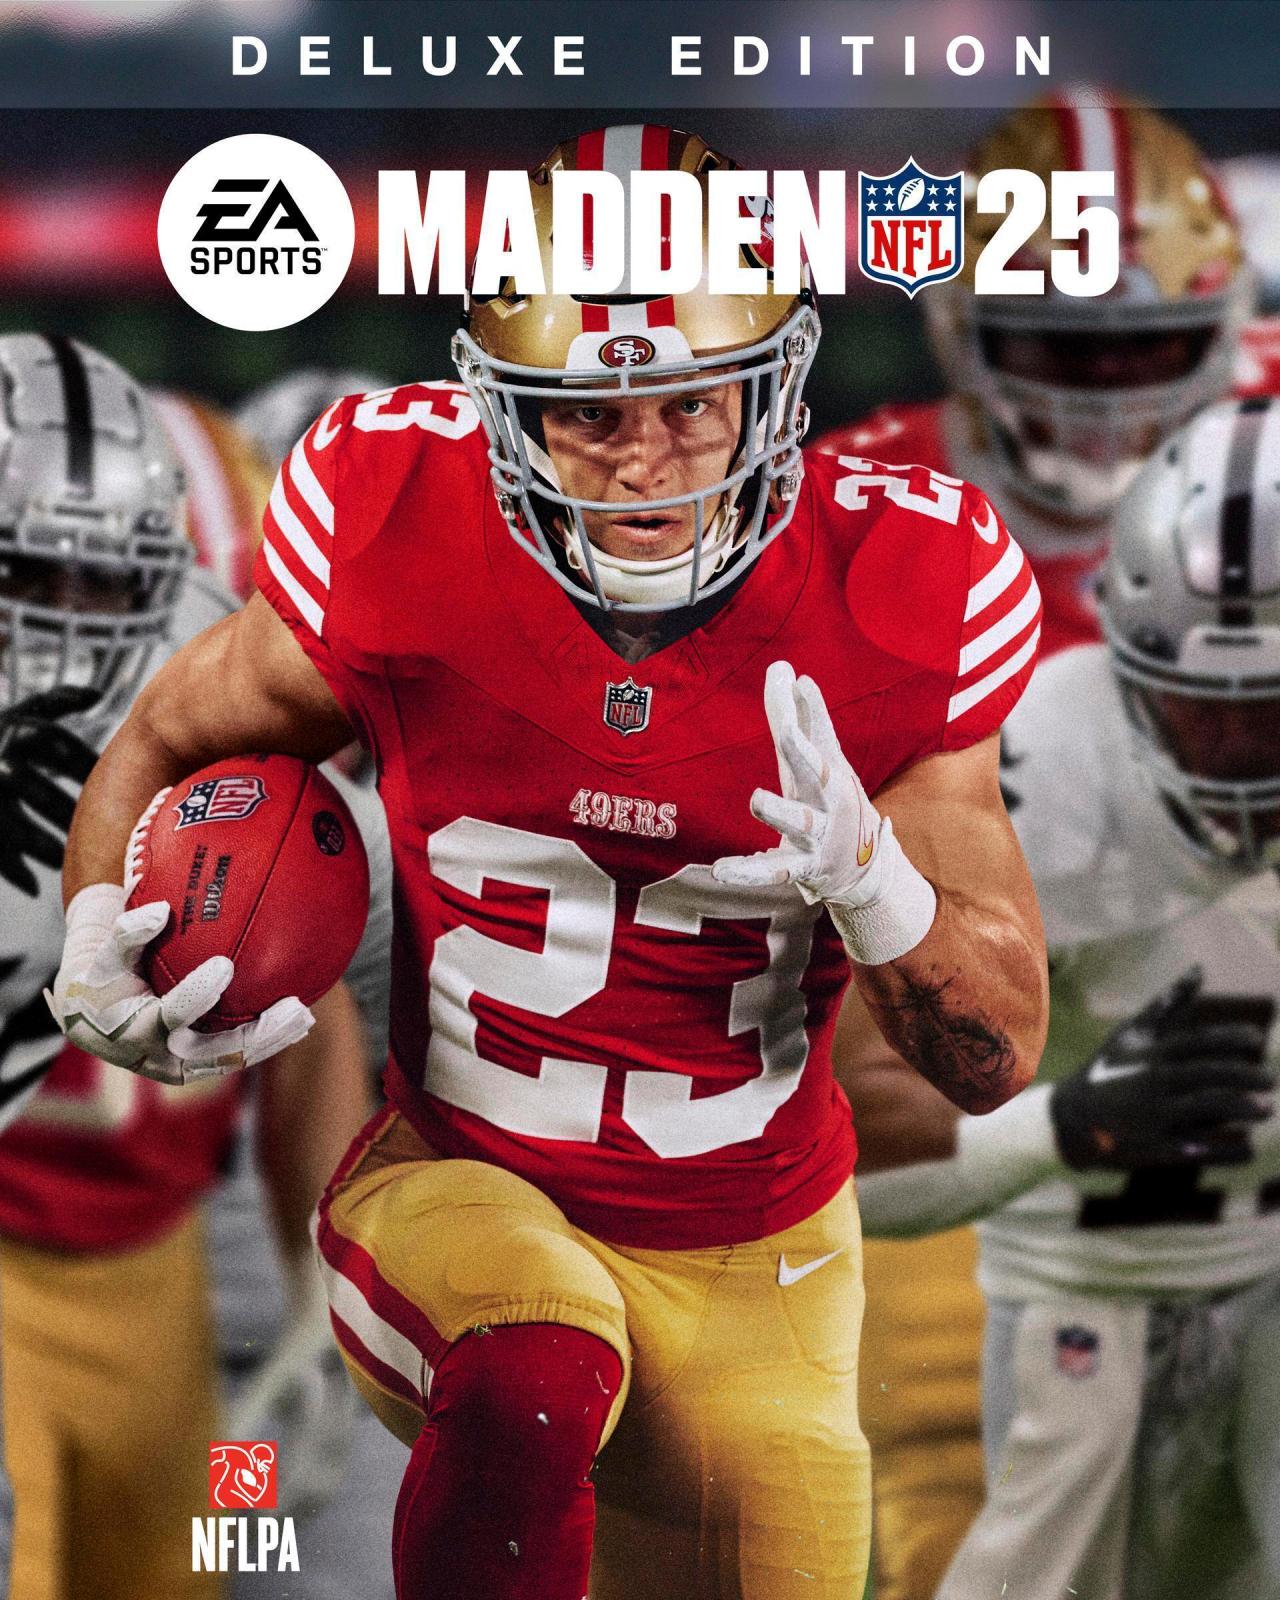 49ers running back Christian McCaffrey gets honored with Madden cover | KLRT [Video]